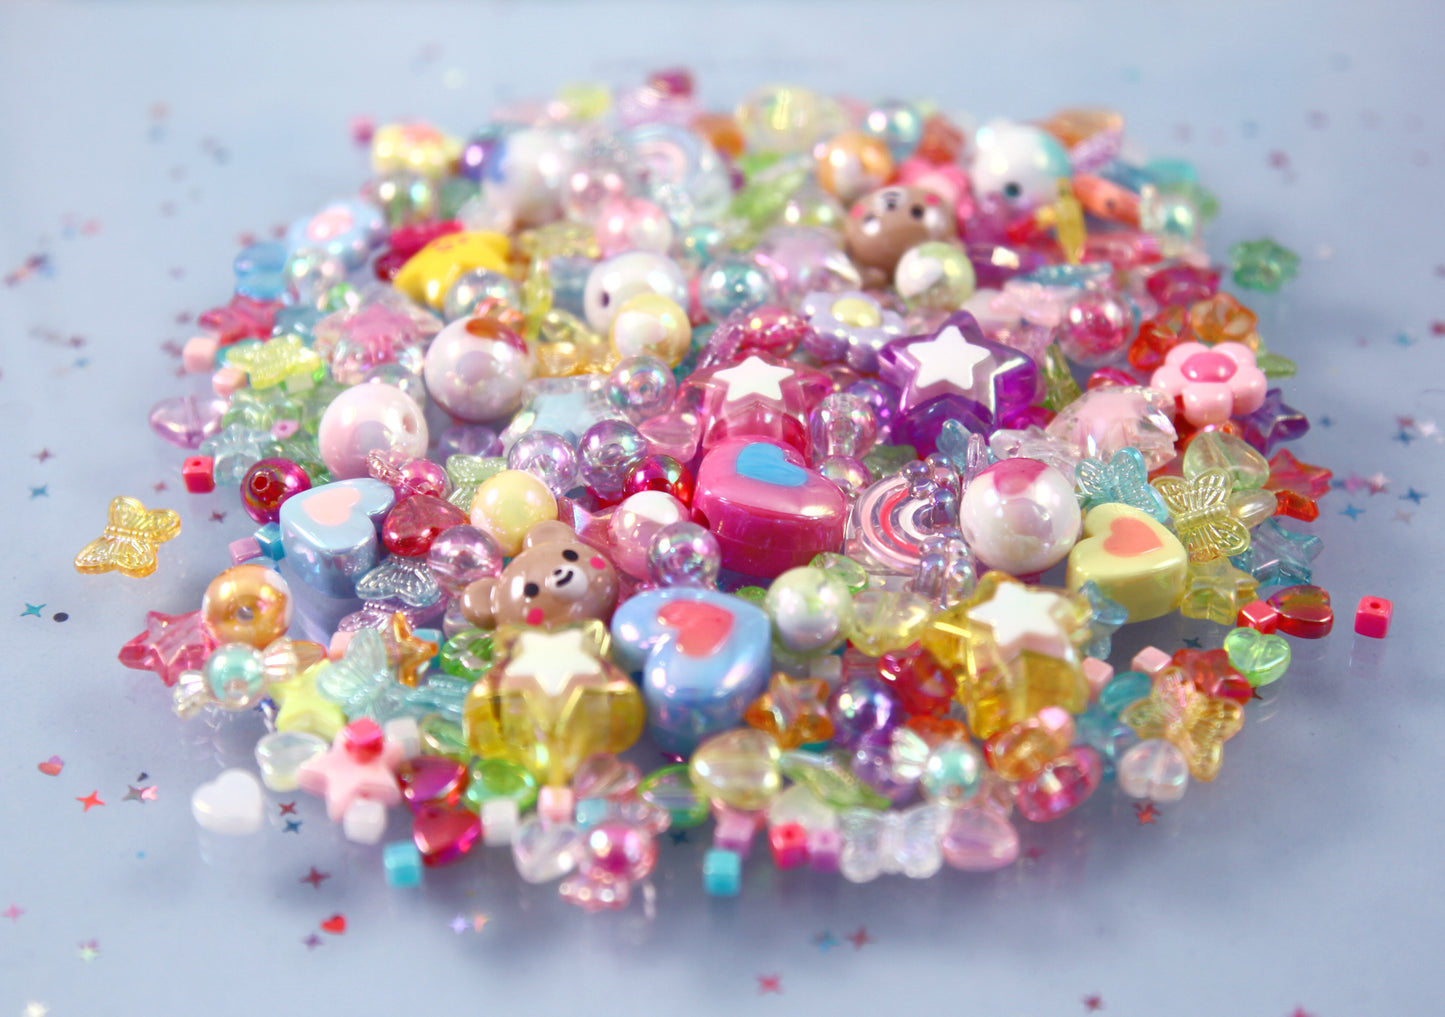 Acrylic Bead Grab Bag - AB / Iridescent Colors - Mixed Lot of Plastic Beads - great for kandi, ispy, sensory crafts, jewelry making - Over 200 pcs